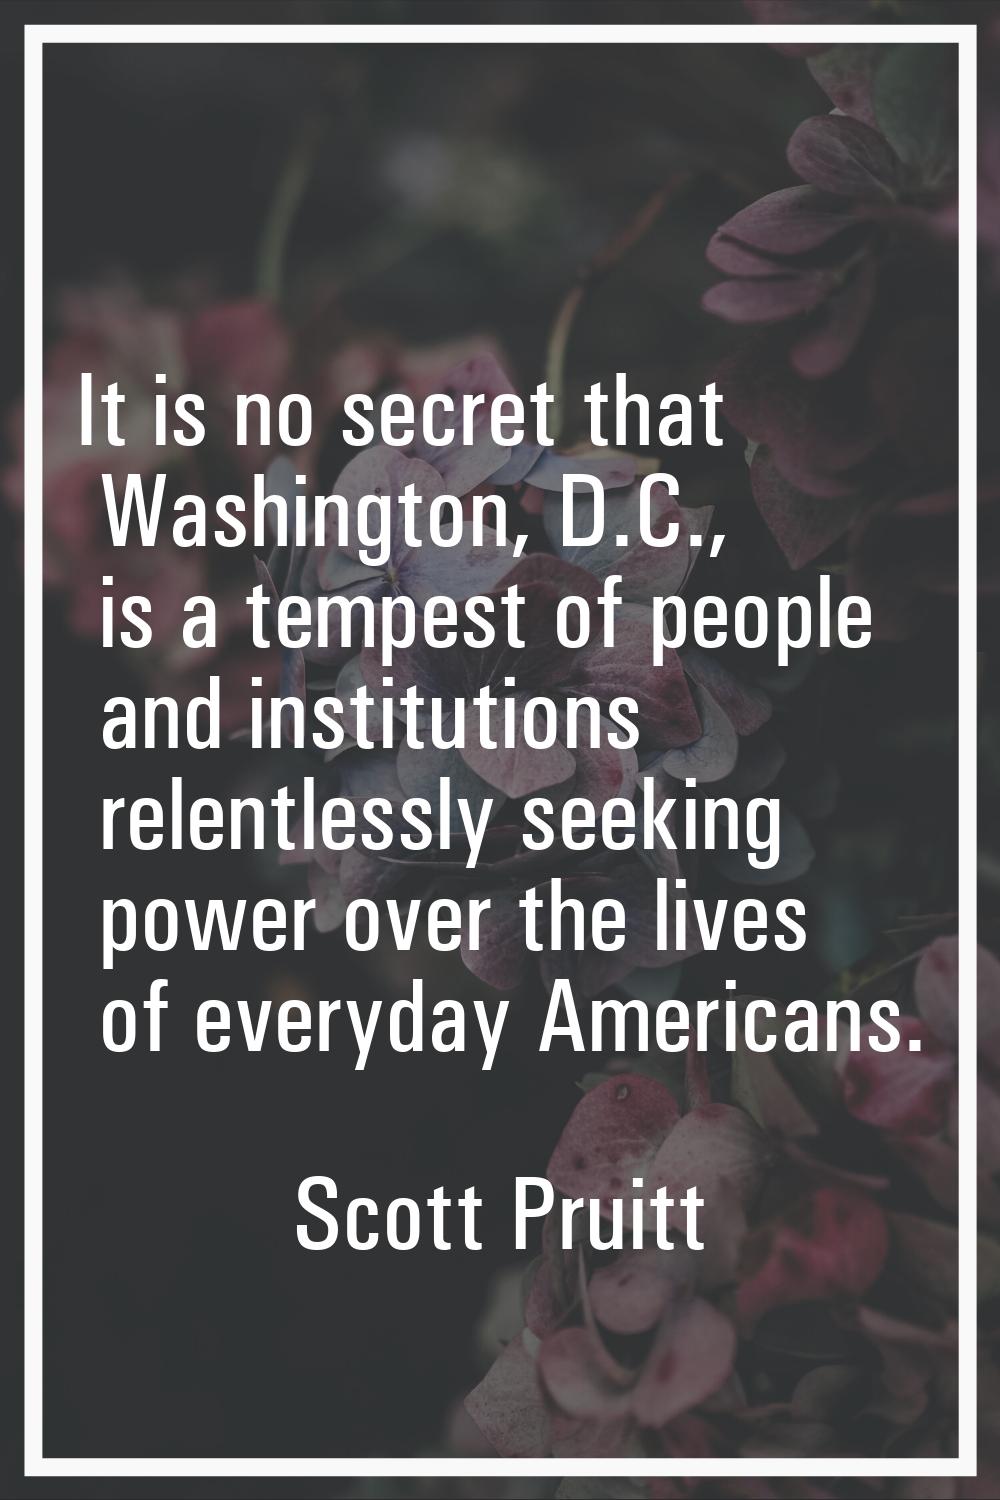 It is no secret that Washington, D.C., is a tempest of people and institutions relentlessly seeking